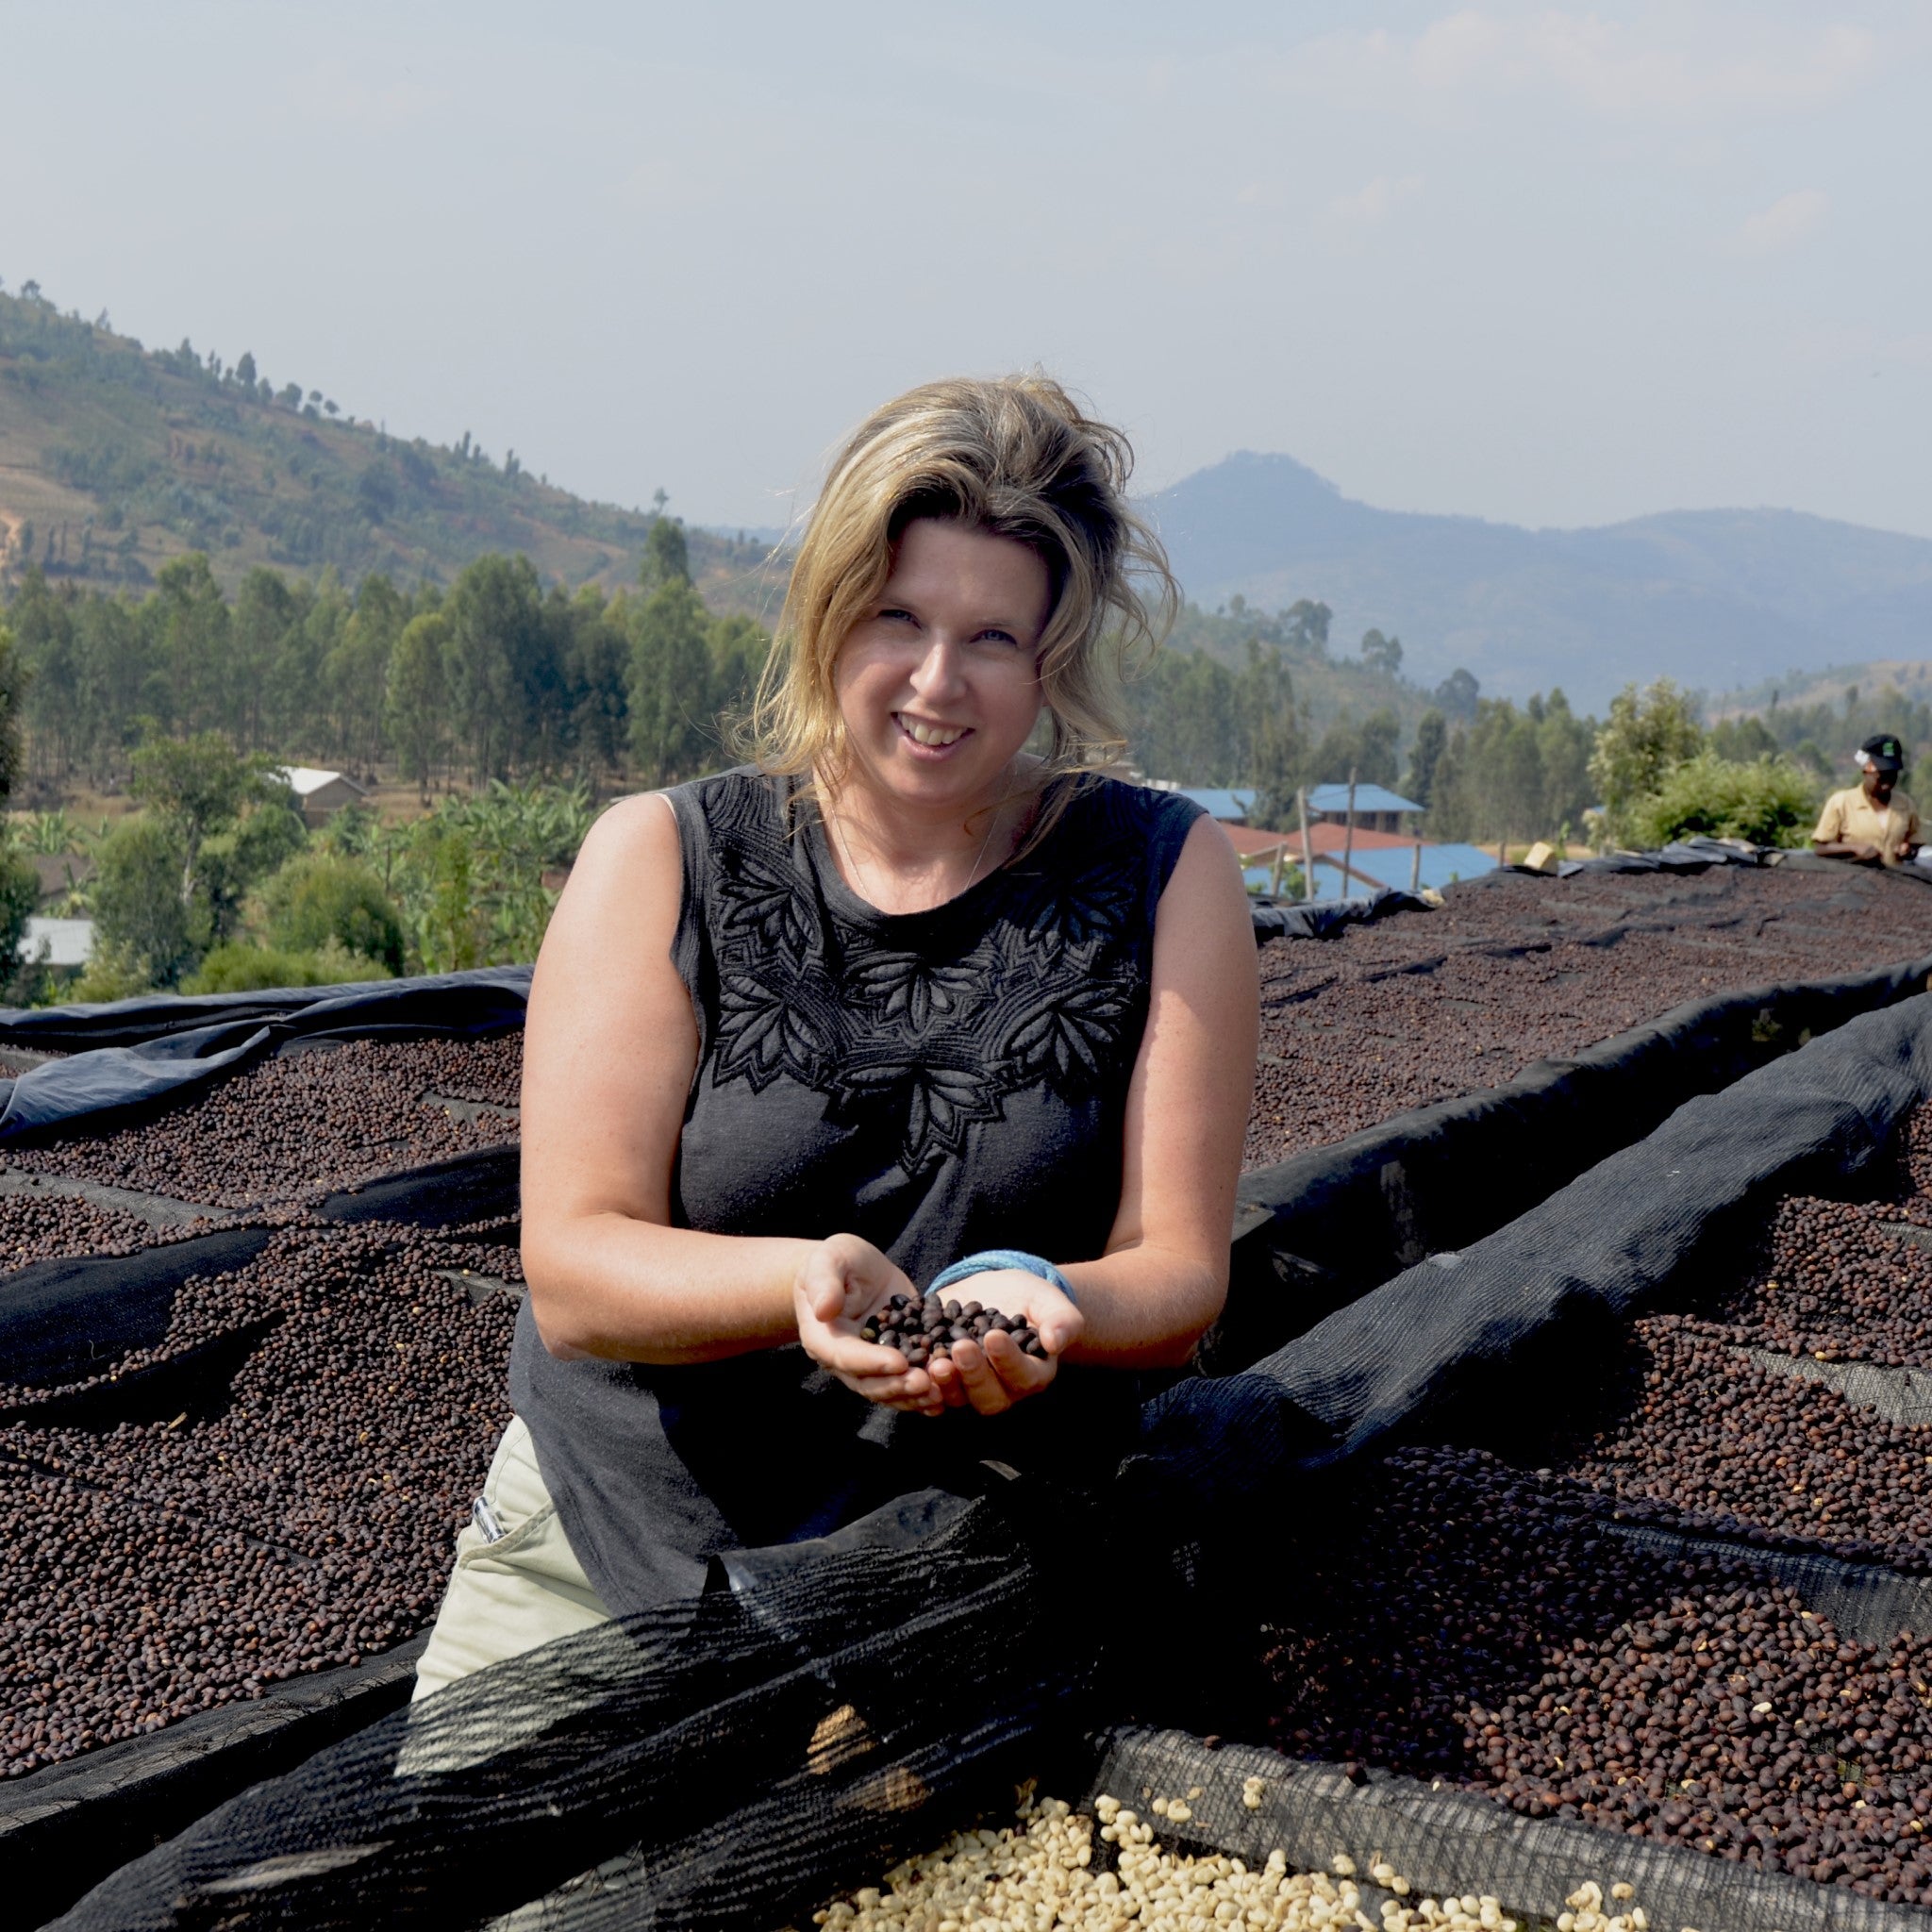 Glen Lyon Coffee Roasters' founder Fiona Grant holding up speciality coffee beans at a washing station in Kenya